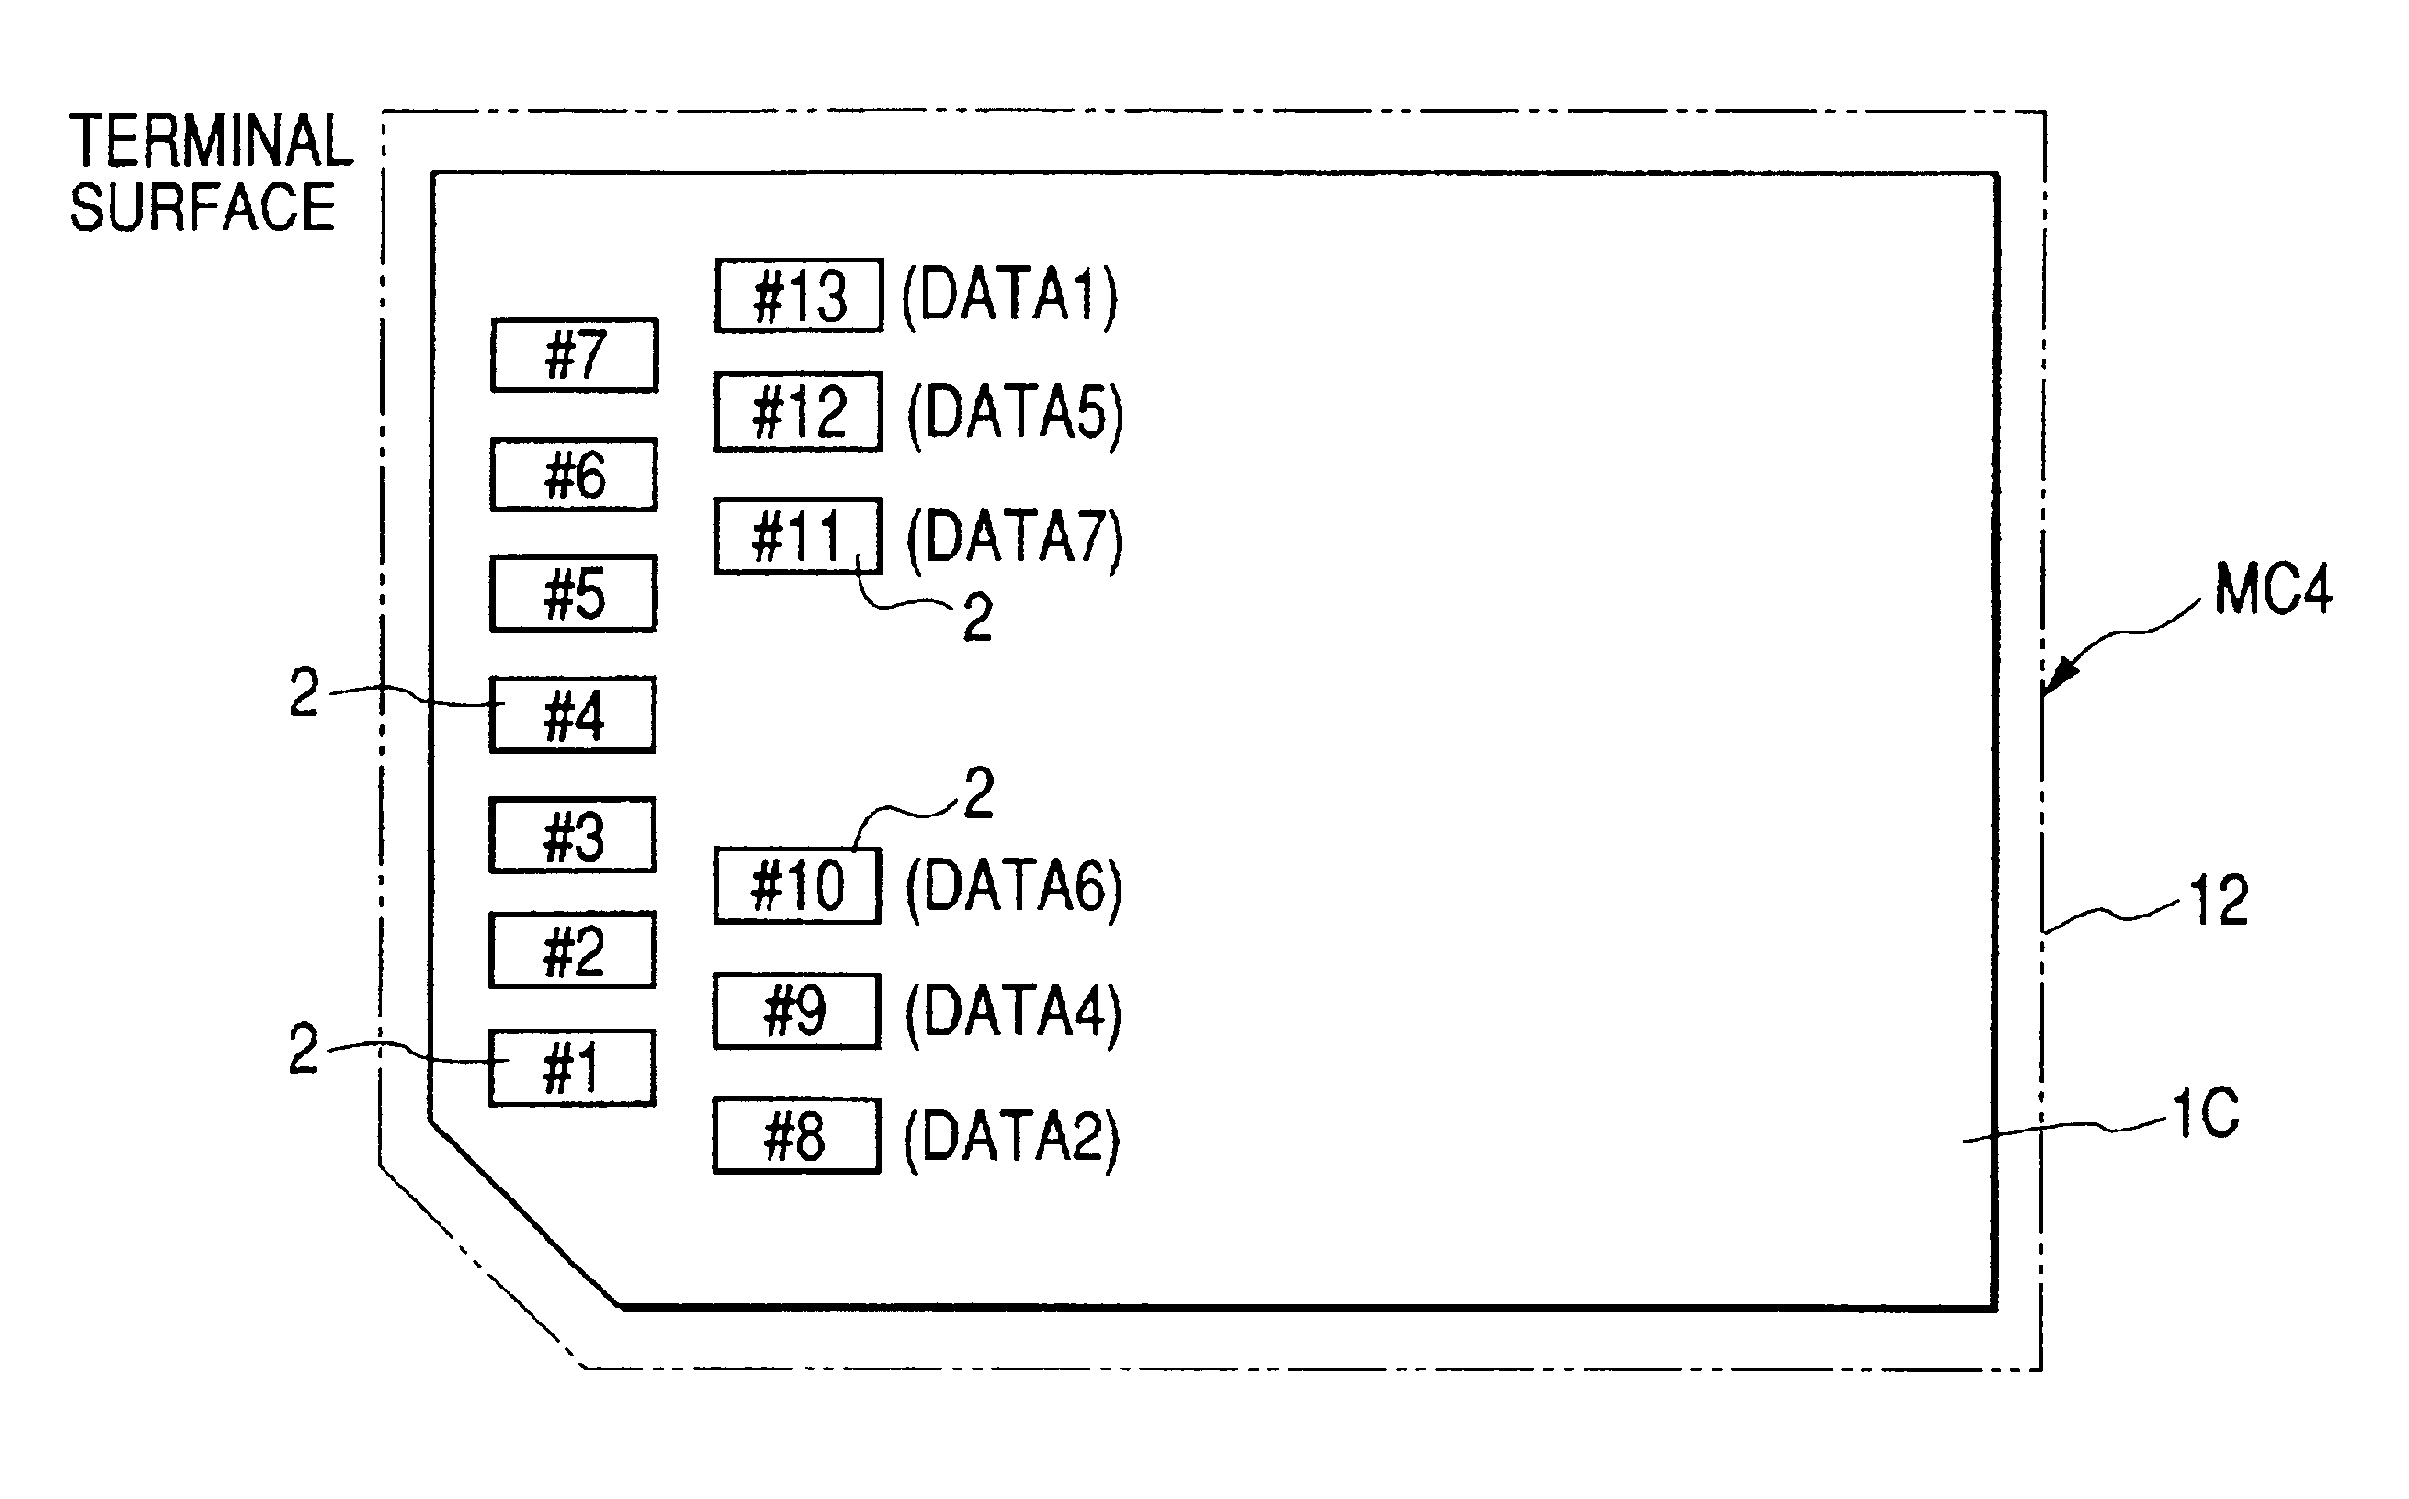 Integrated circuit card having staggered sequences of connector terminals